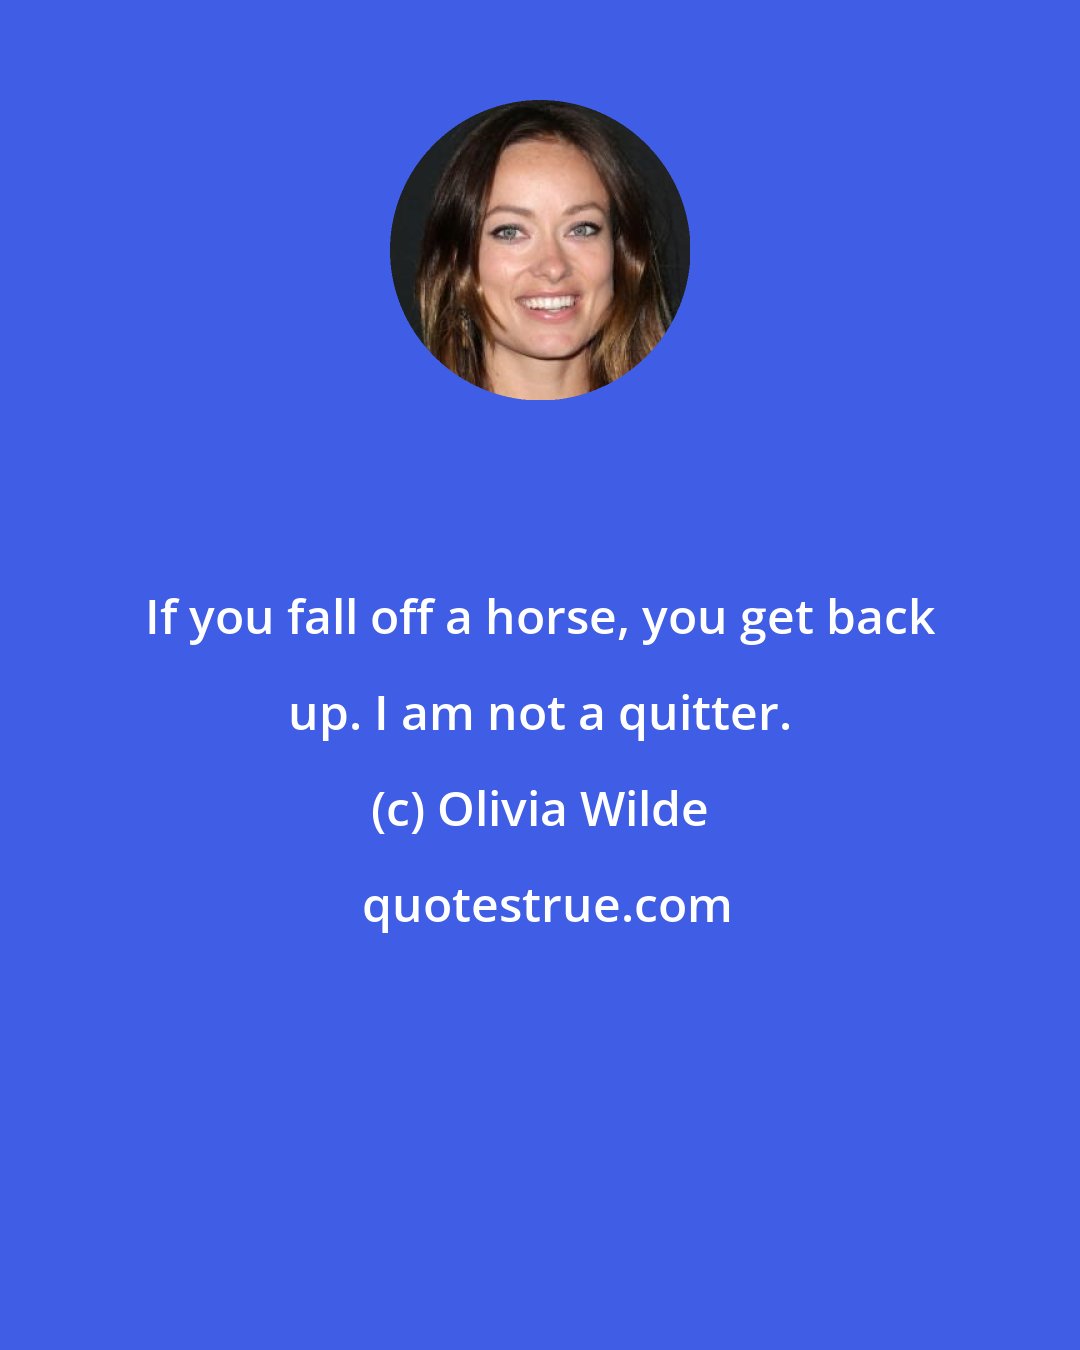 Olivia Wilde: If you fall off a horse, you get back up. I am not a quitter.